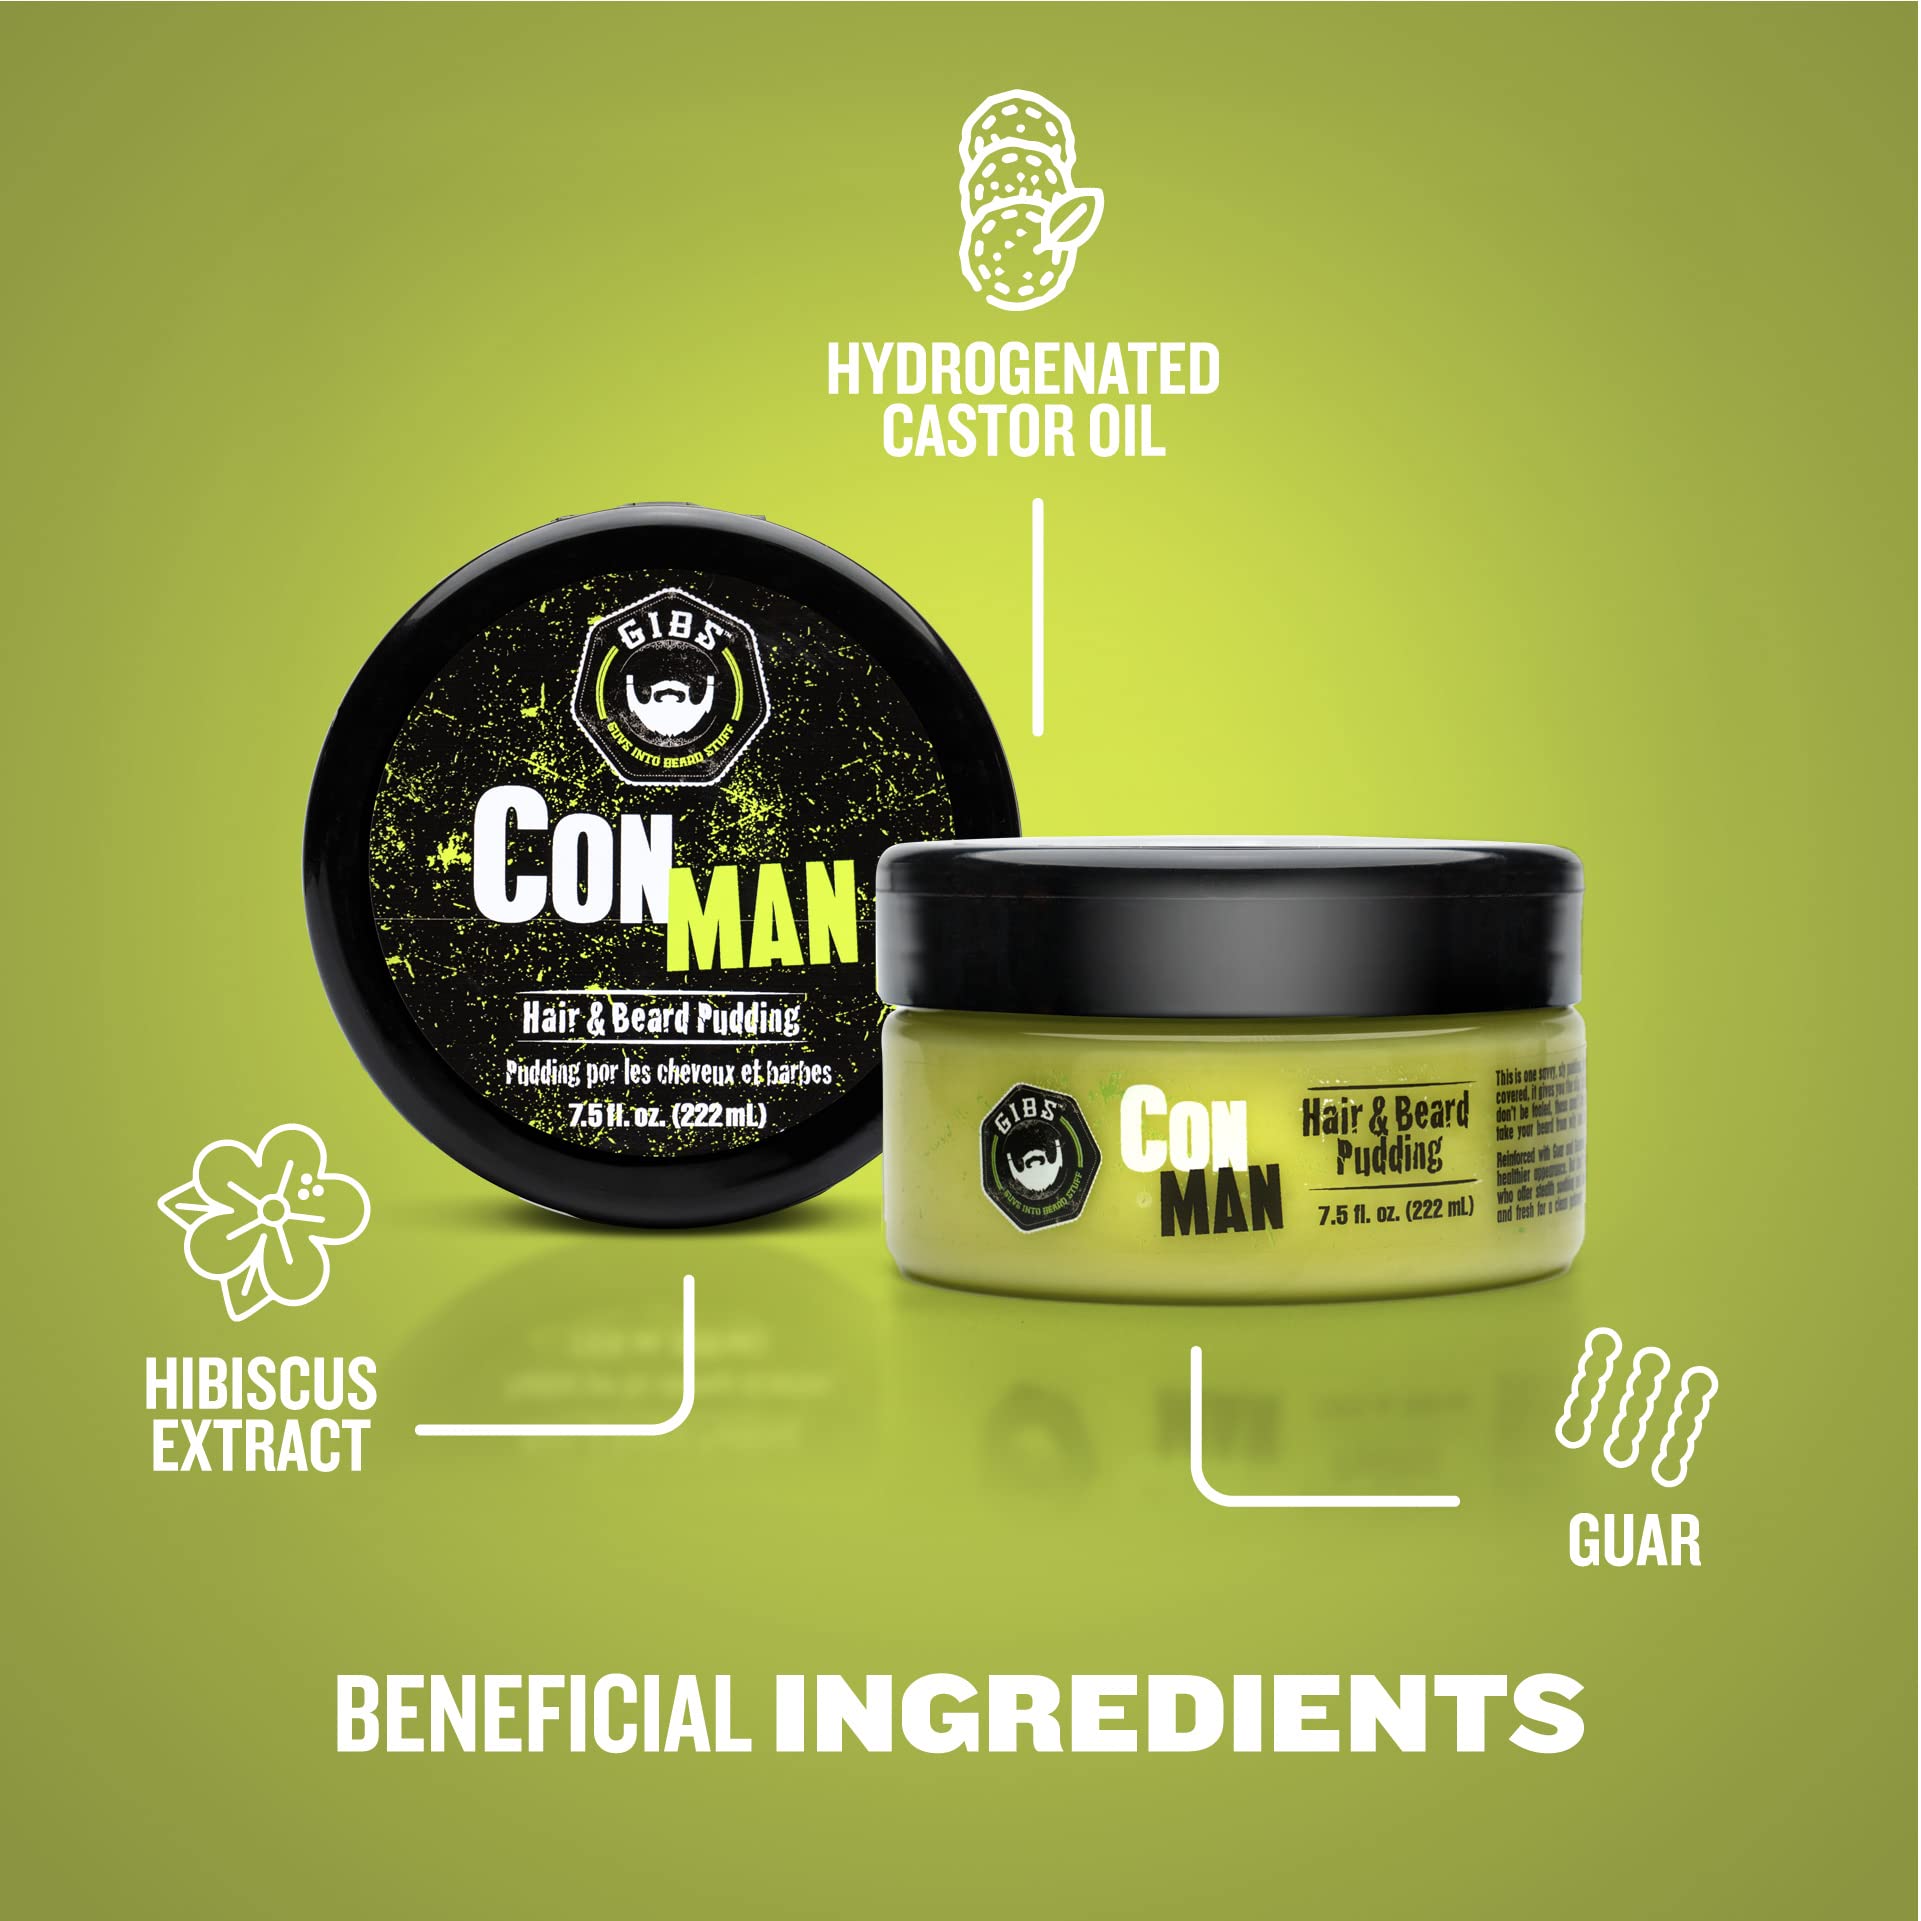 GIBS Con Man Hair & Beard Pudding - Leave-In Conditioner, Curl Definer, 3.25 Fl oz